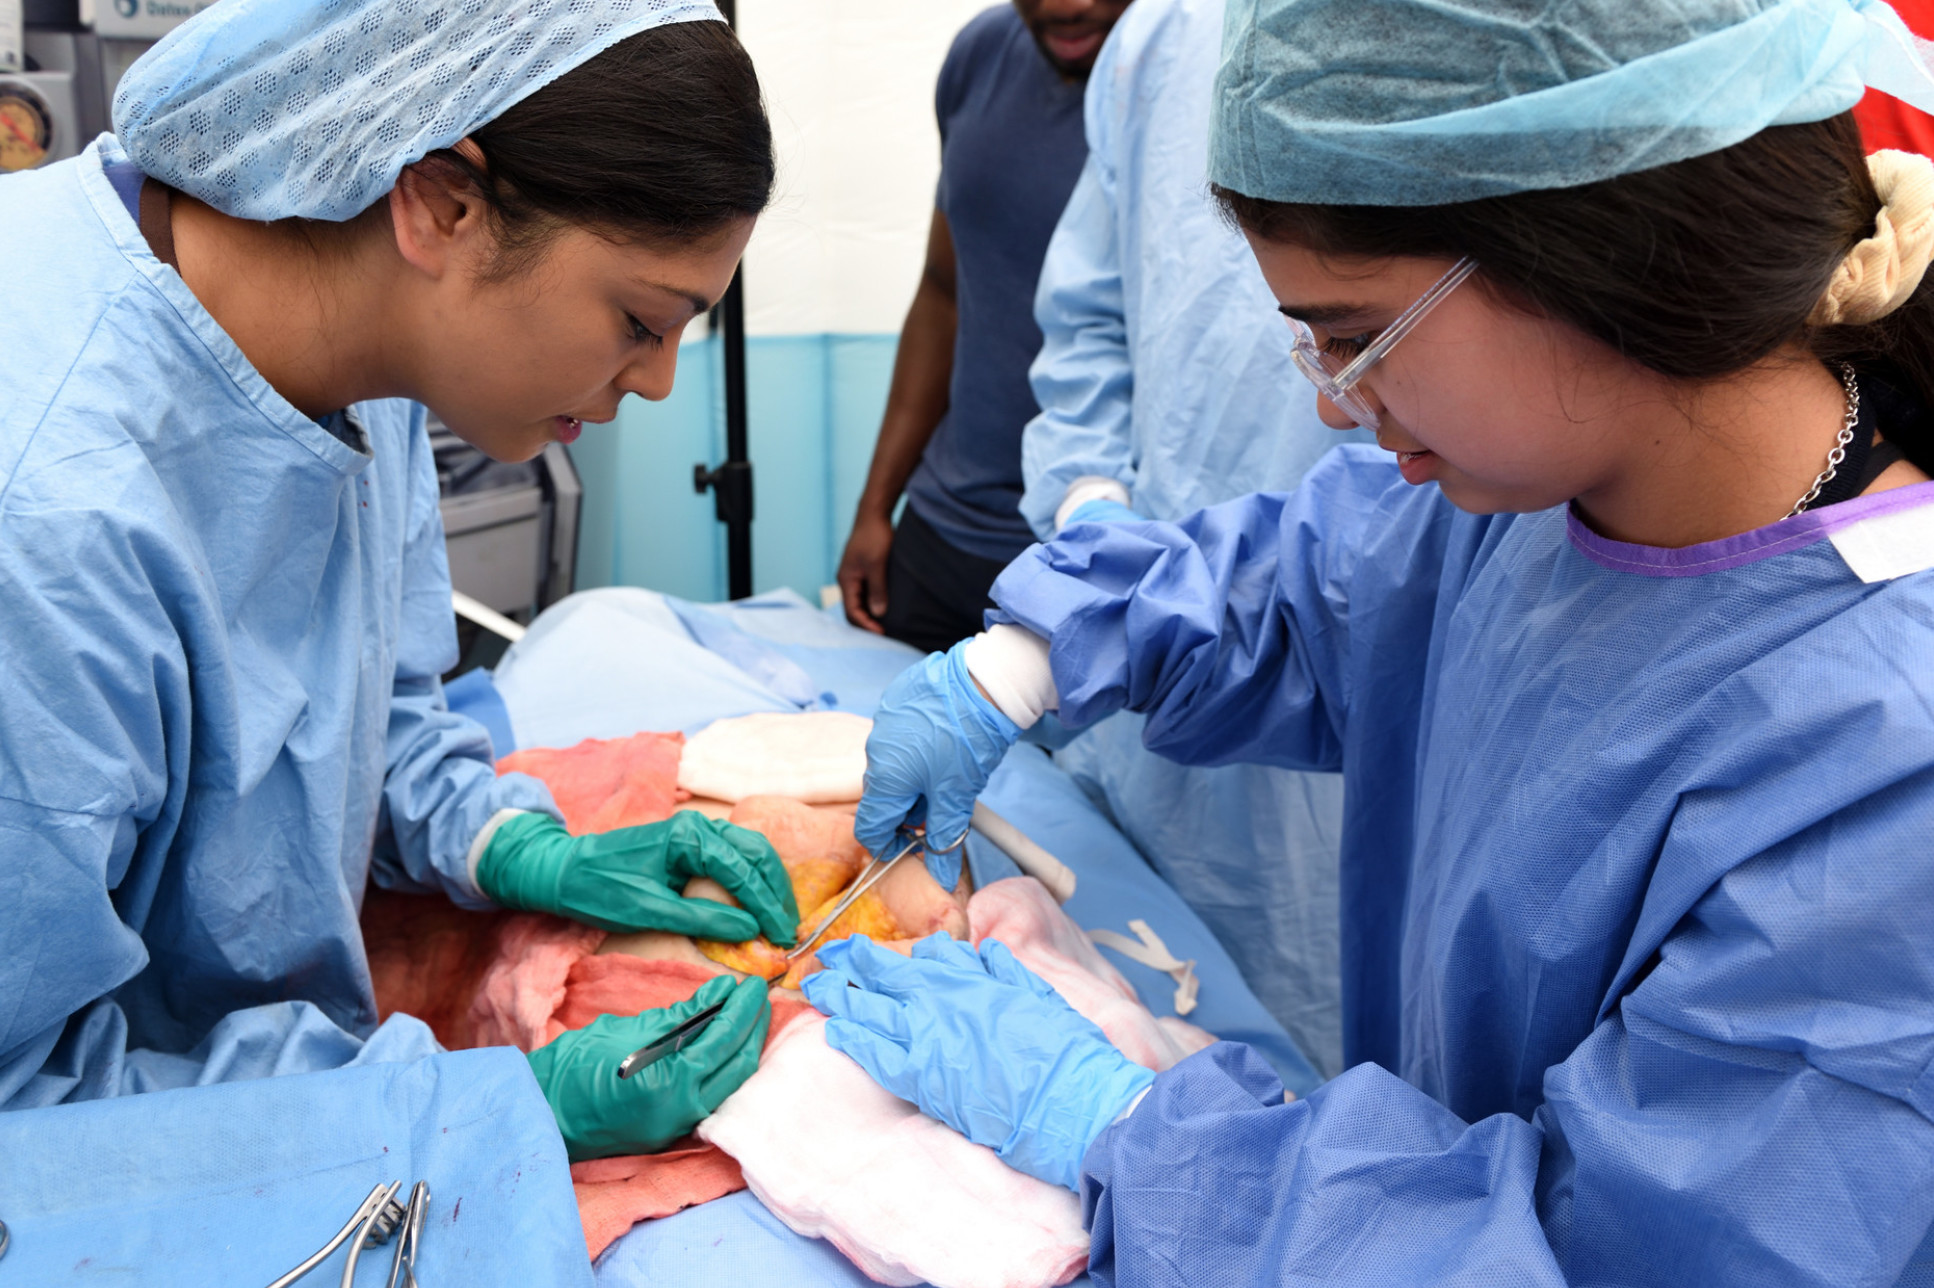 Participants in a mock surgical theatre